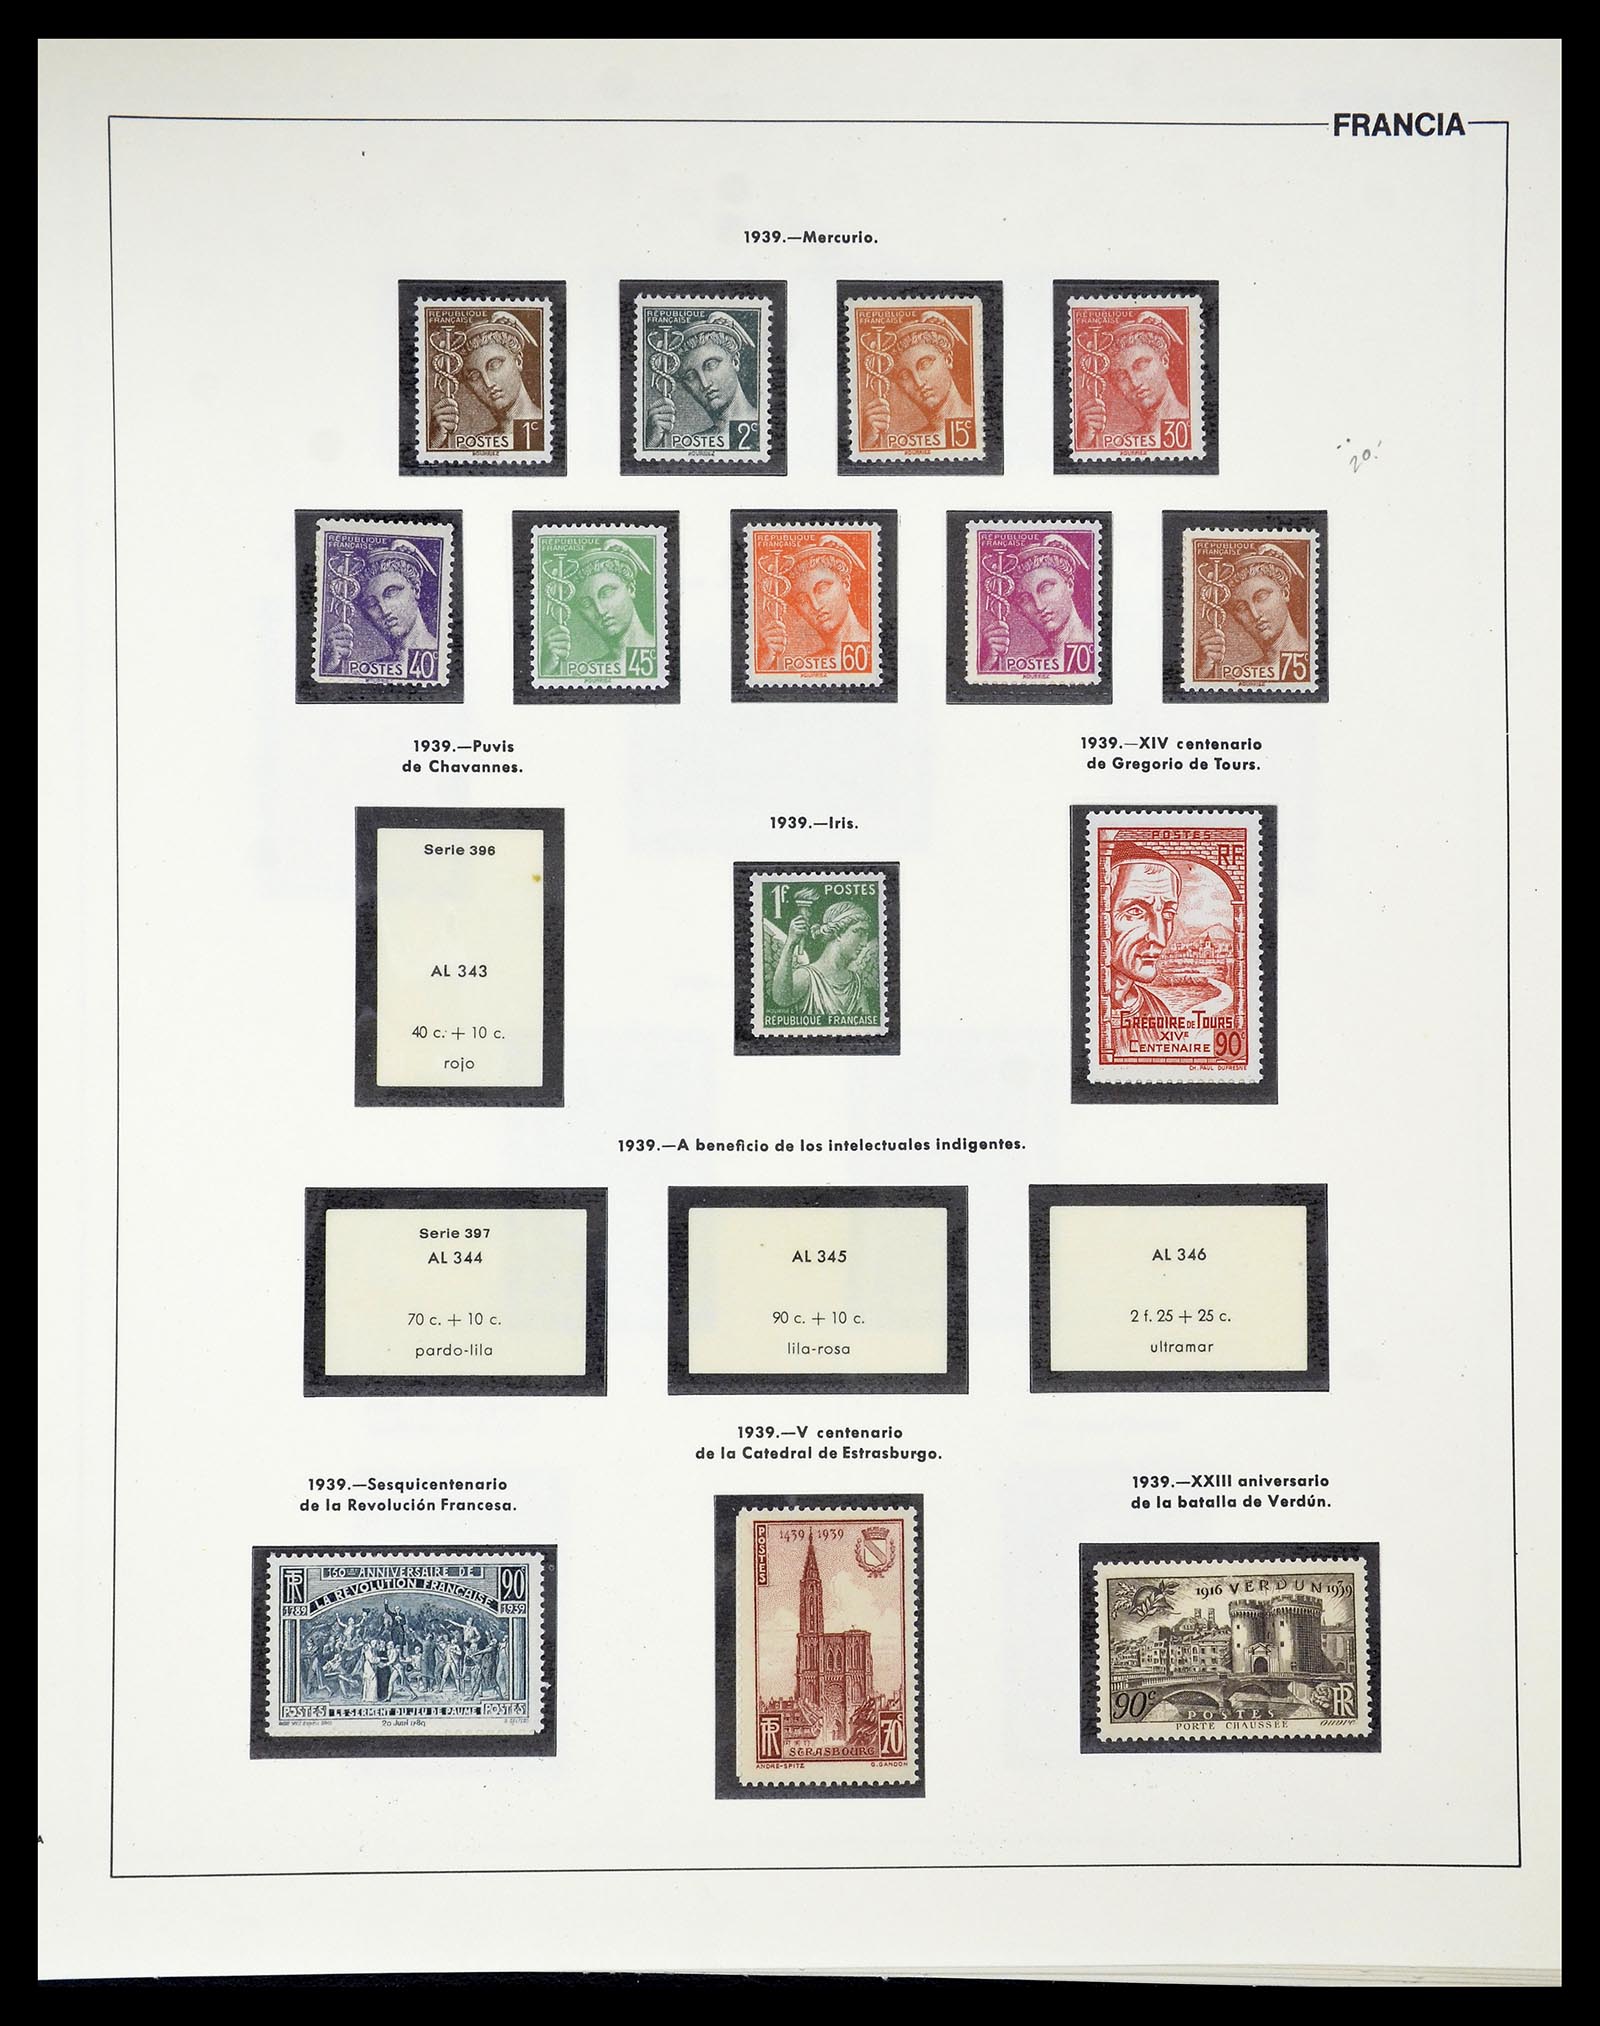 34755 027 - Stamp Collection 34755 France 1900-2000.